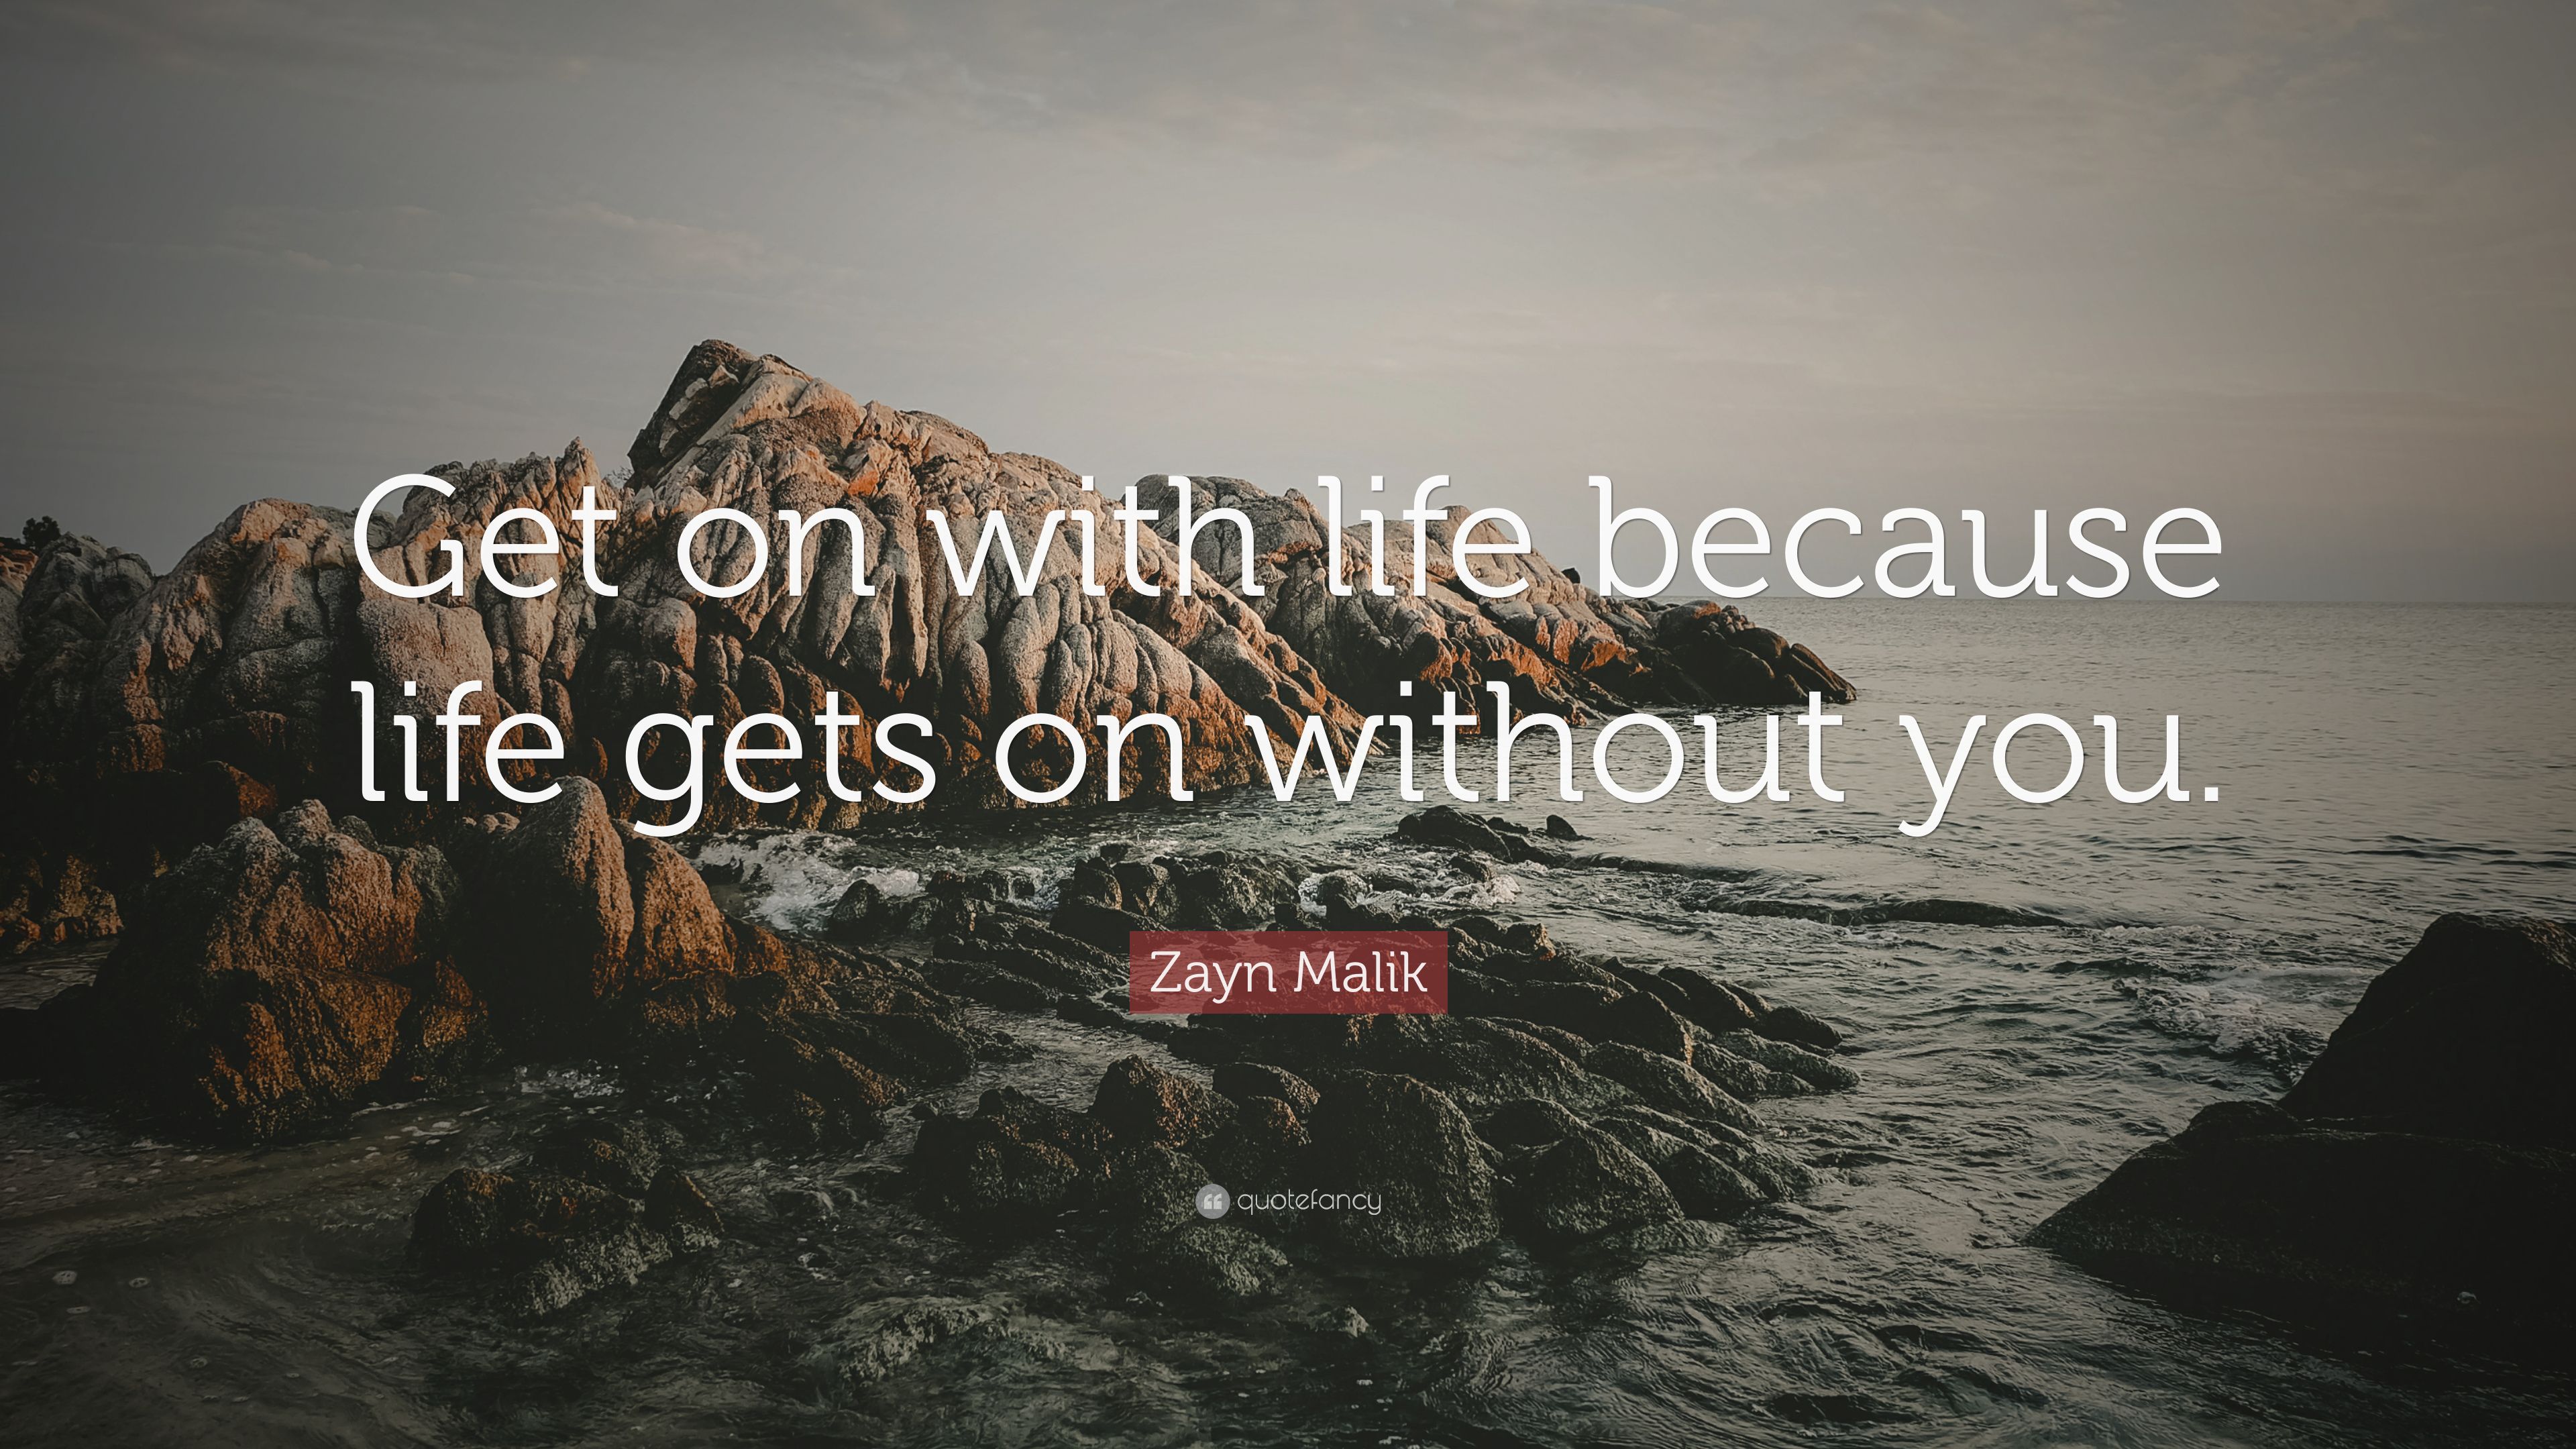 Zayn Malik Quote: “Get on with life because life gets on without you.” (10 wallpaper)